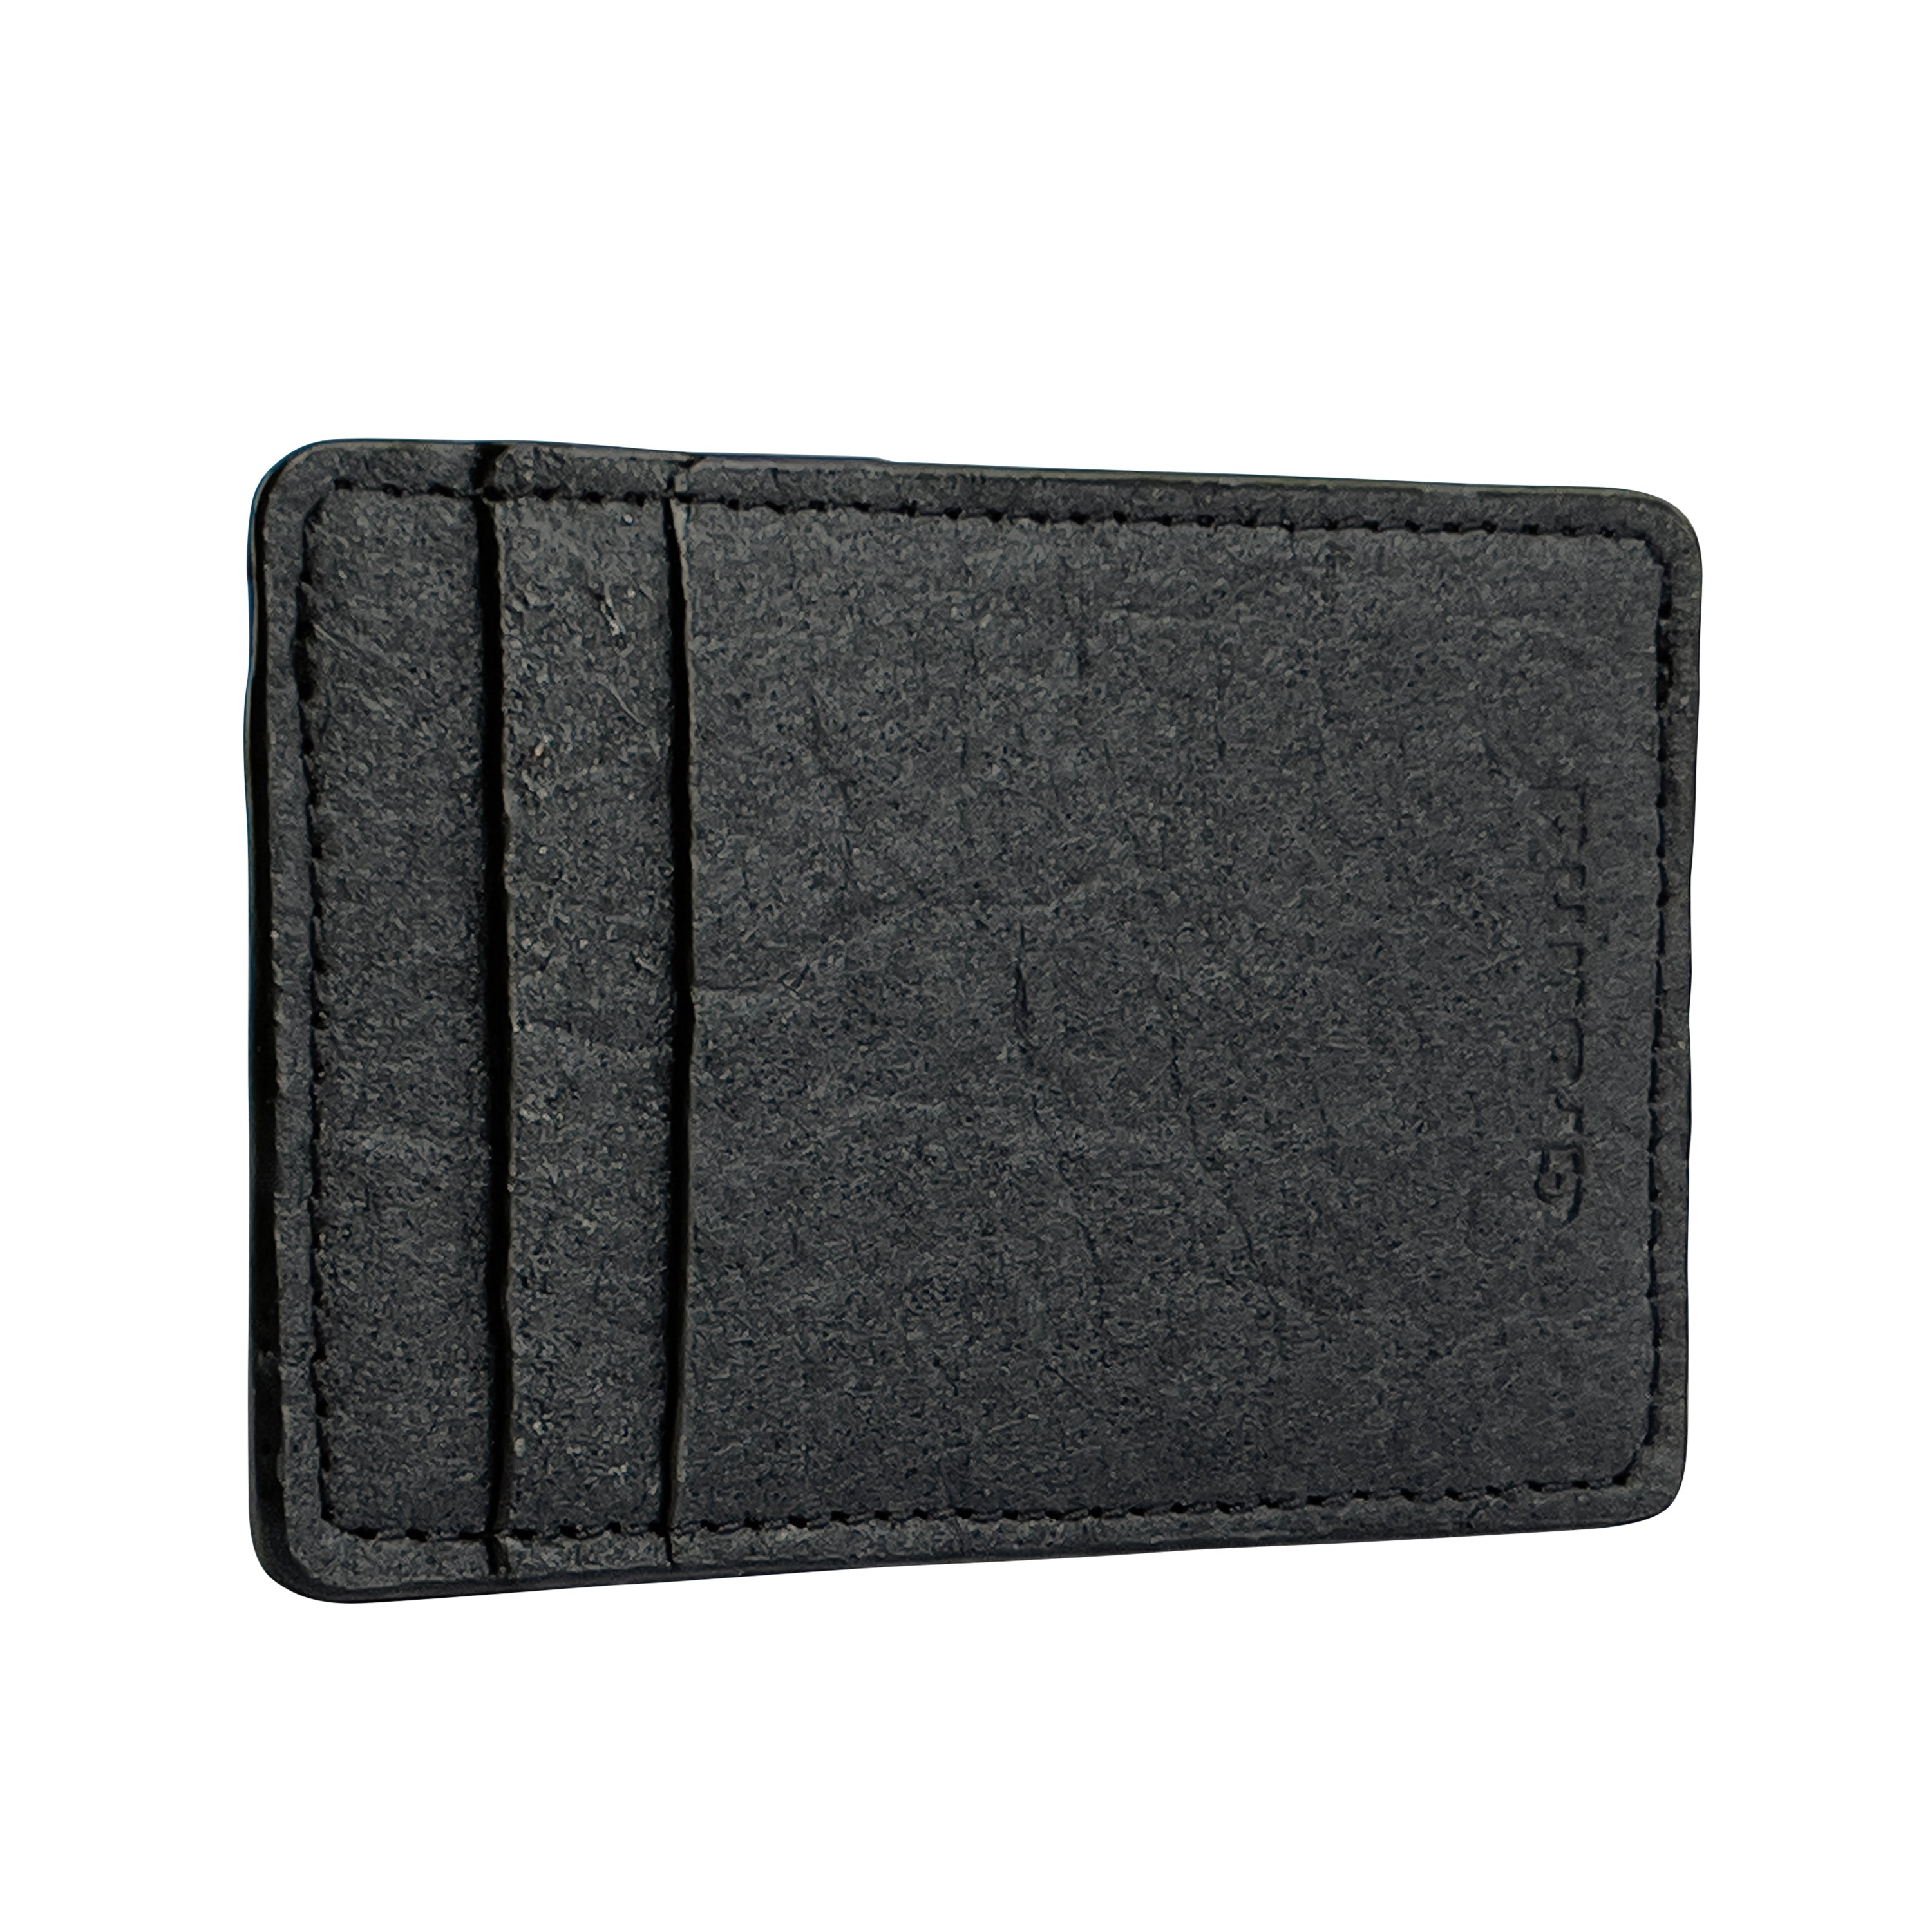 The Cardholder from the front angled